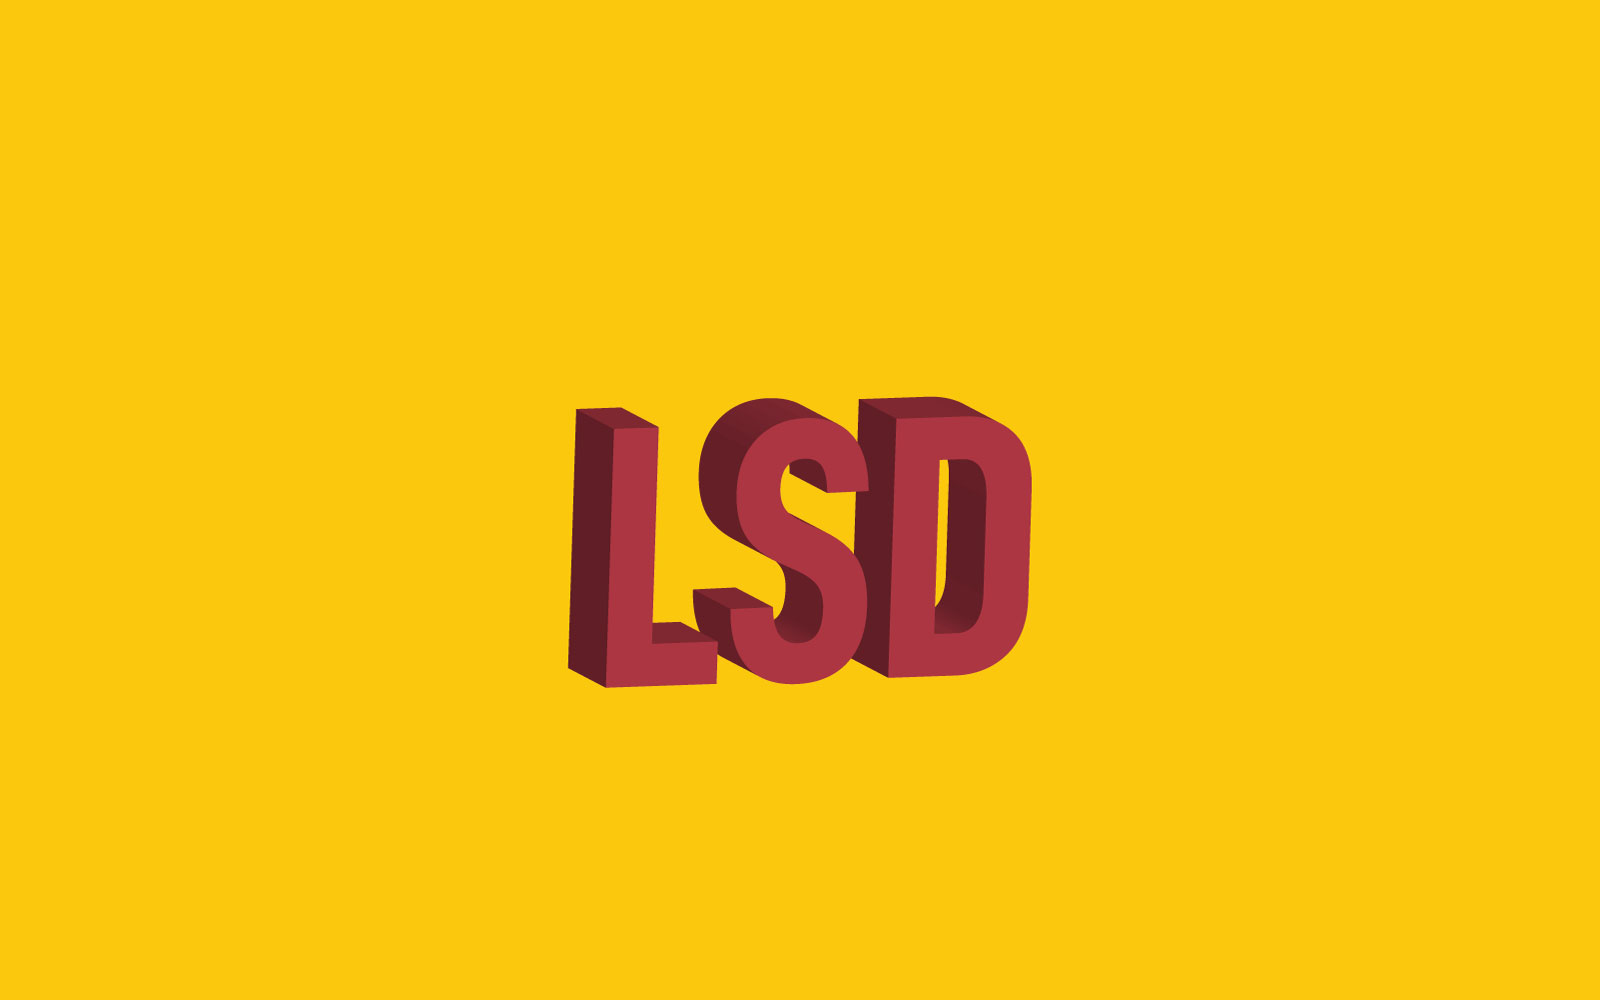 LSD Guide: Effects, Common Uses, Safety